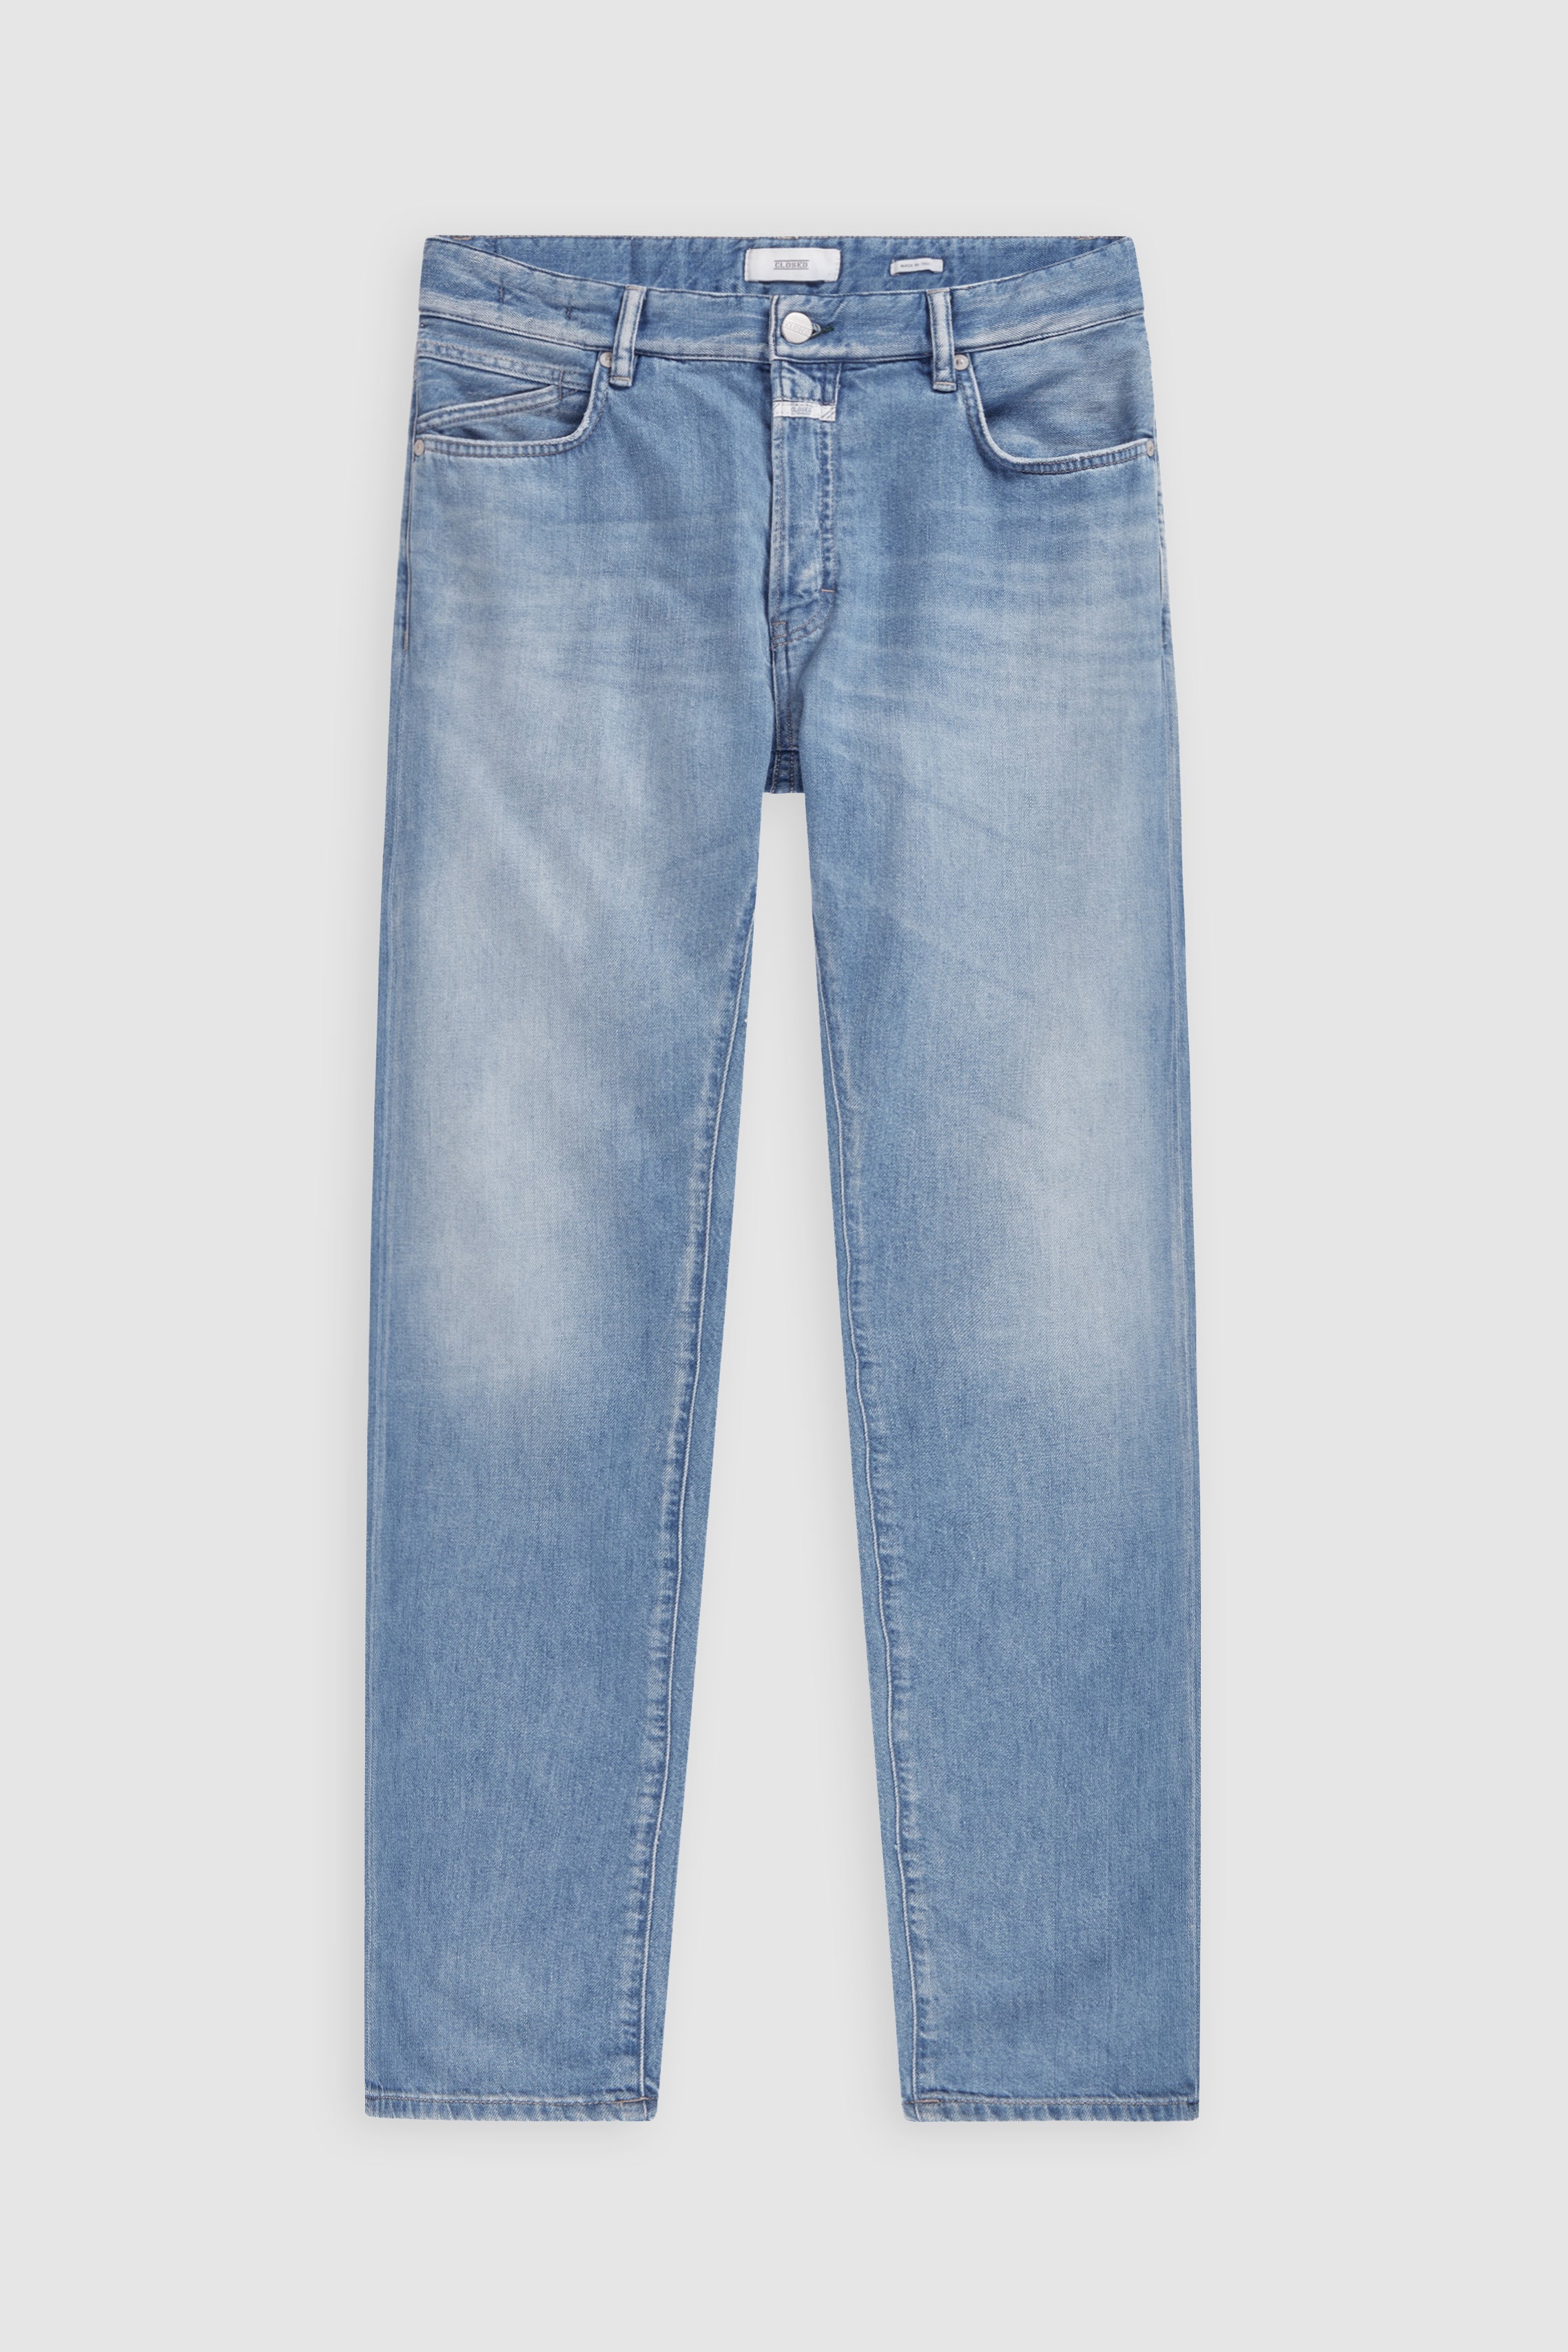 CLOSED-OUTLET-SALE-STYLE-NAME-OAKLAND-STRAIGHT-JEANS-Hosen-ARCHIVE-COLLECTION-4_ca2902b1-73c4-4ef1-9a5d-ab674845ad74.jpg